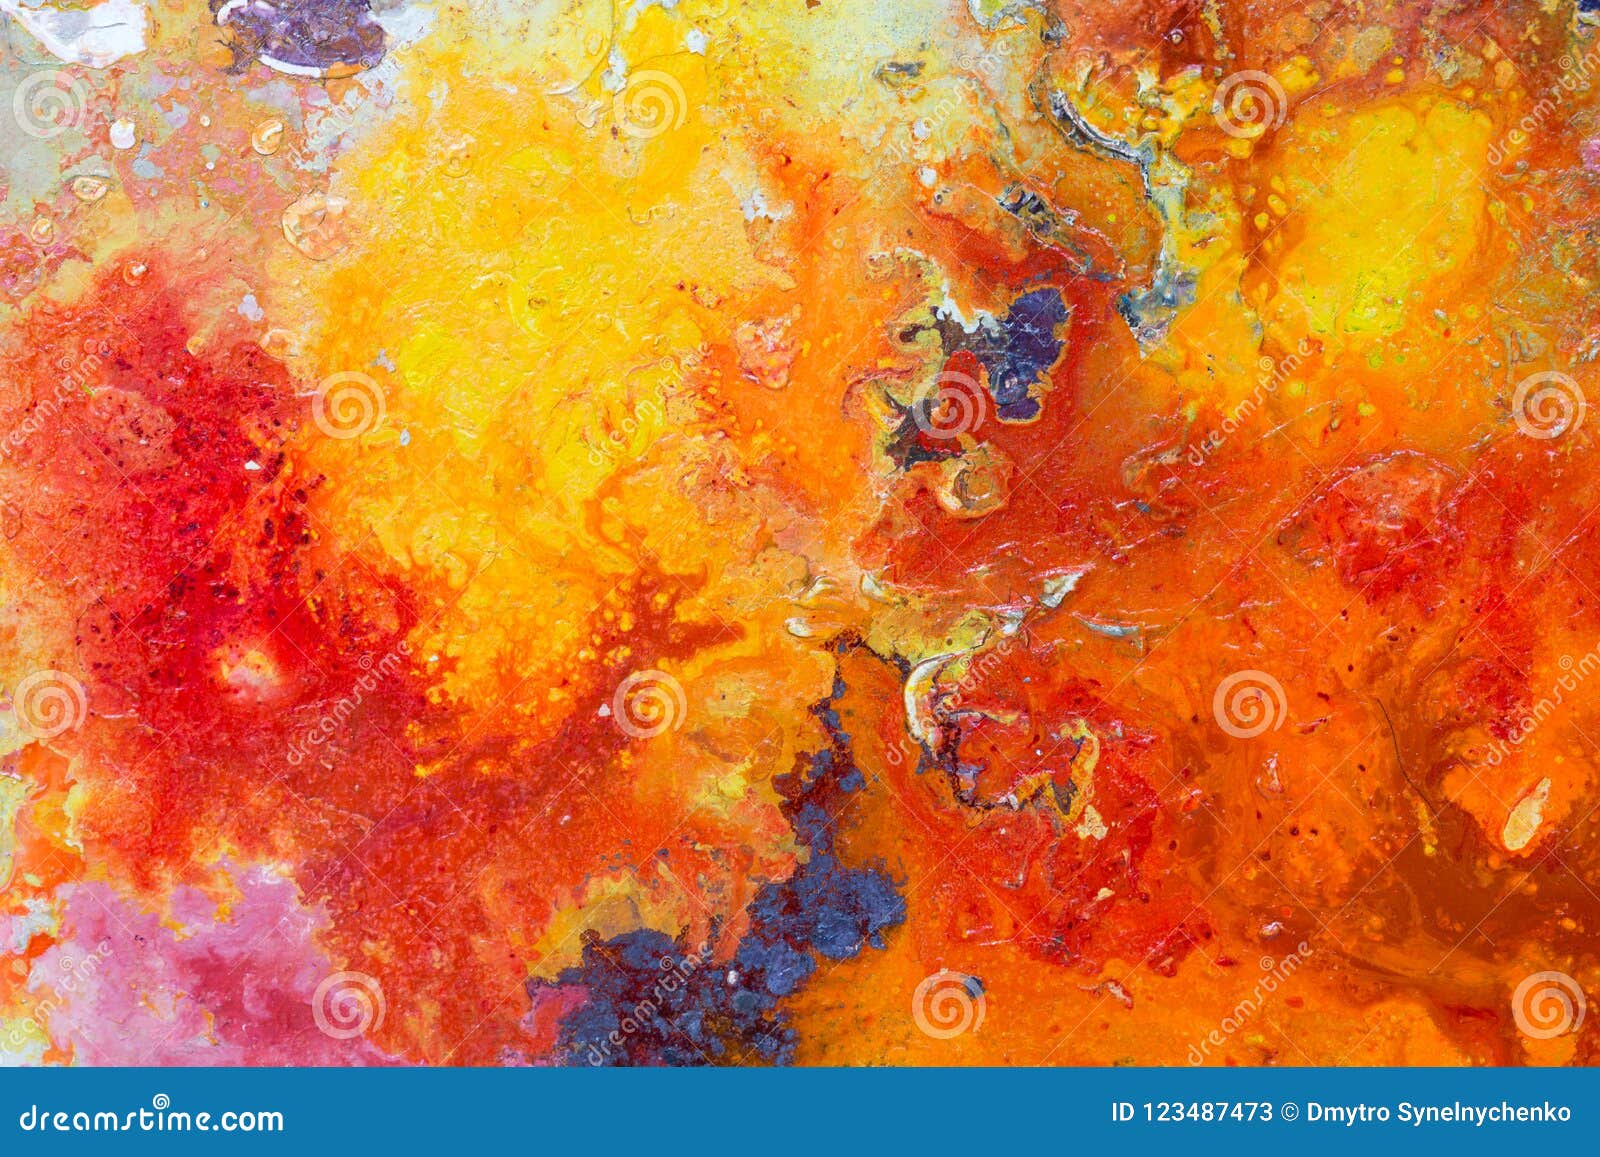 abstract painting color texture. bright artistic background in r